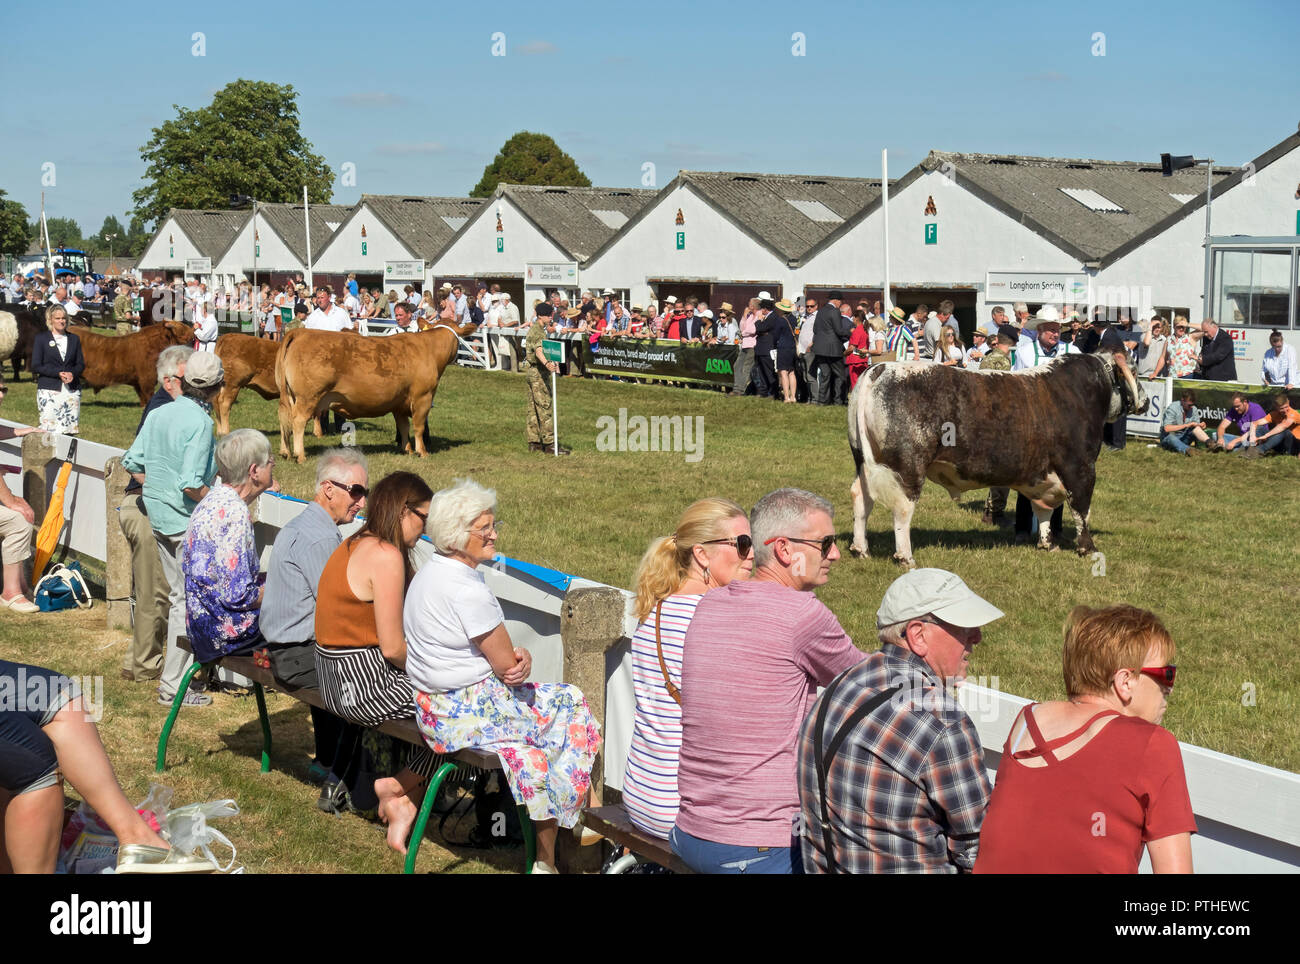 People watching the prize winning cattle parade at Great Yorkshire Show in summer Harrogate North Yorkshire England UK United Kingdom Great Britain Stock Photo